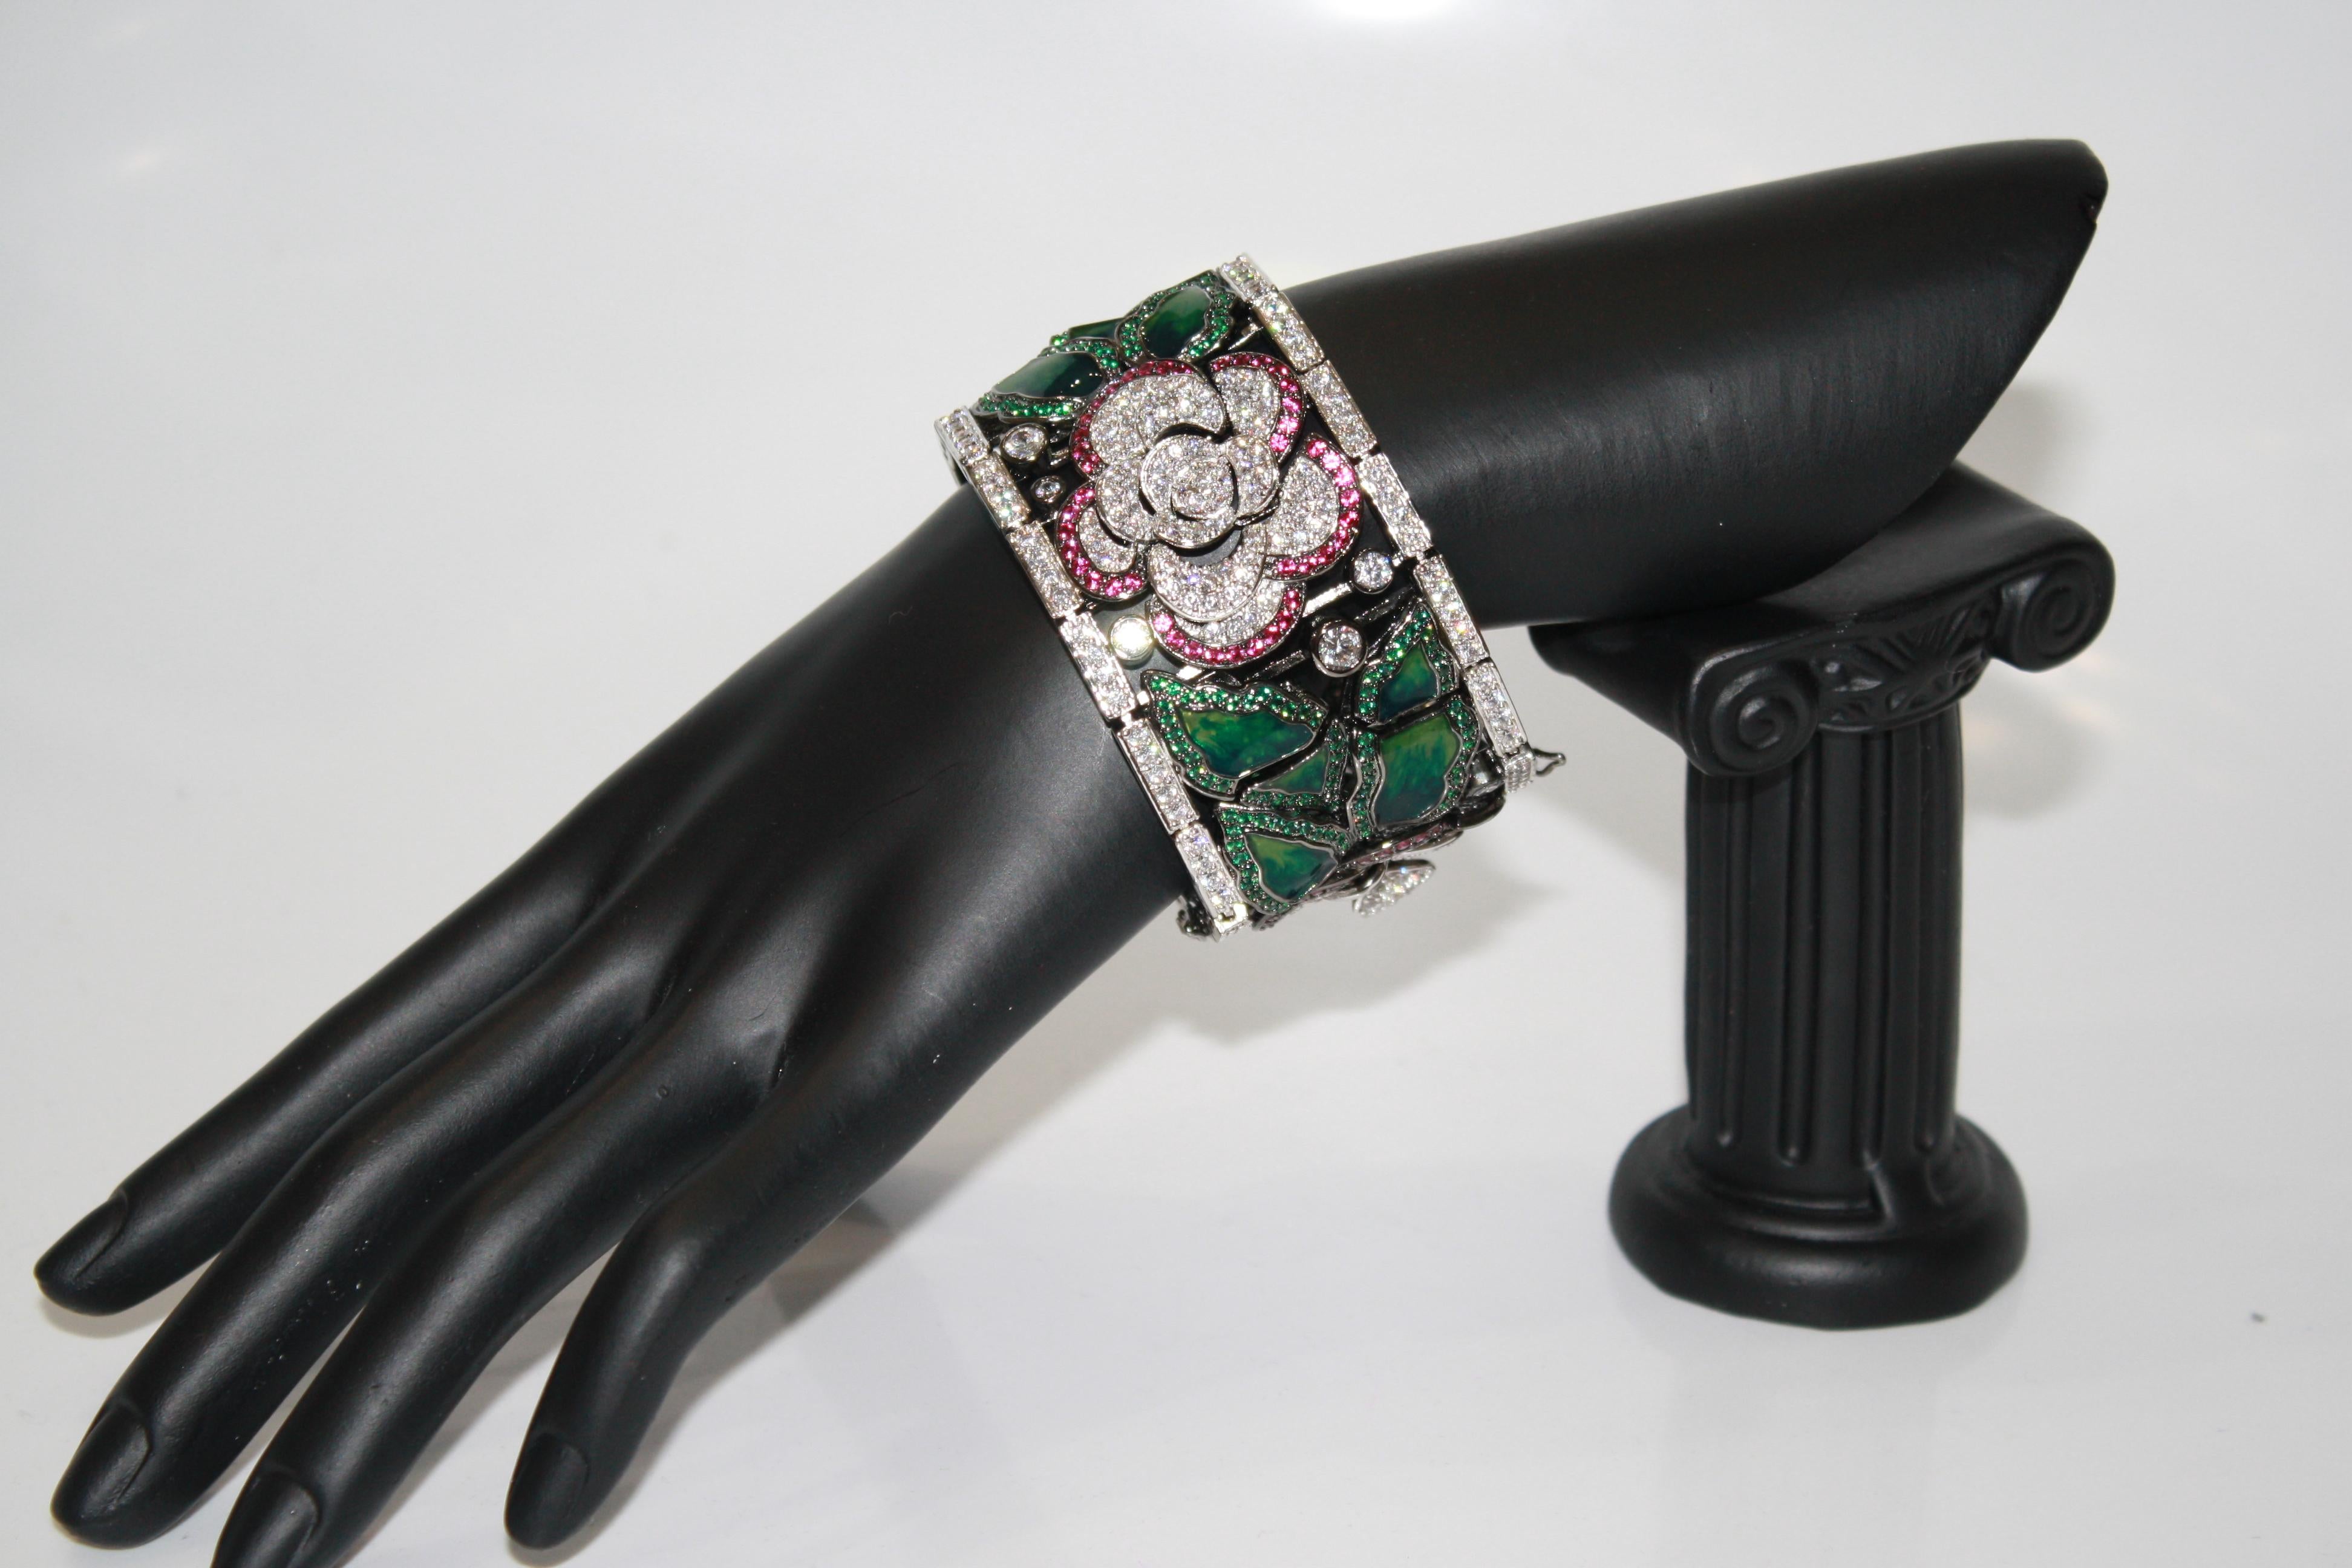 In an Art Deco style this bracelet is made of articulated rectangular pieces in dark rhodium with inlaid enamel flower motifs and colored zirconium of the finest quality.